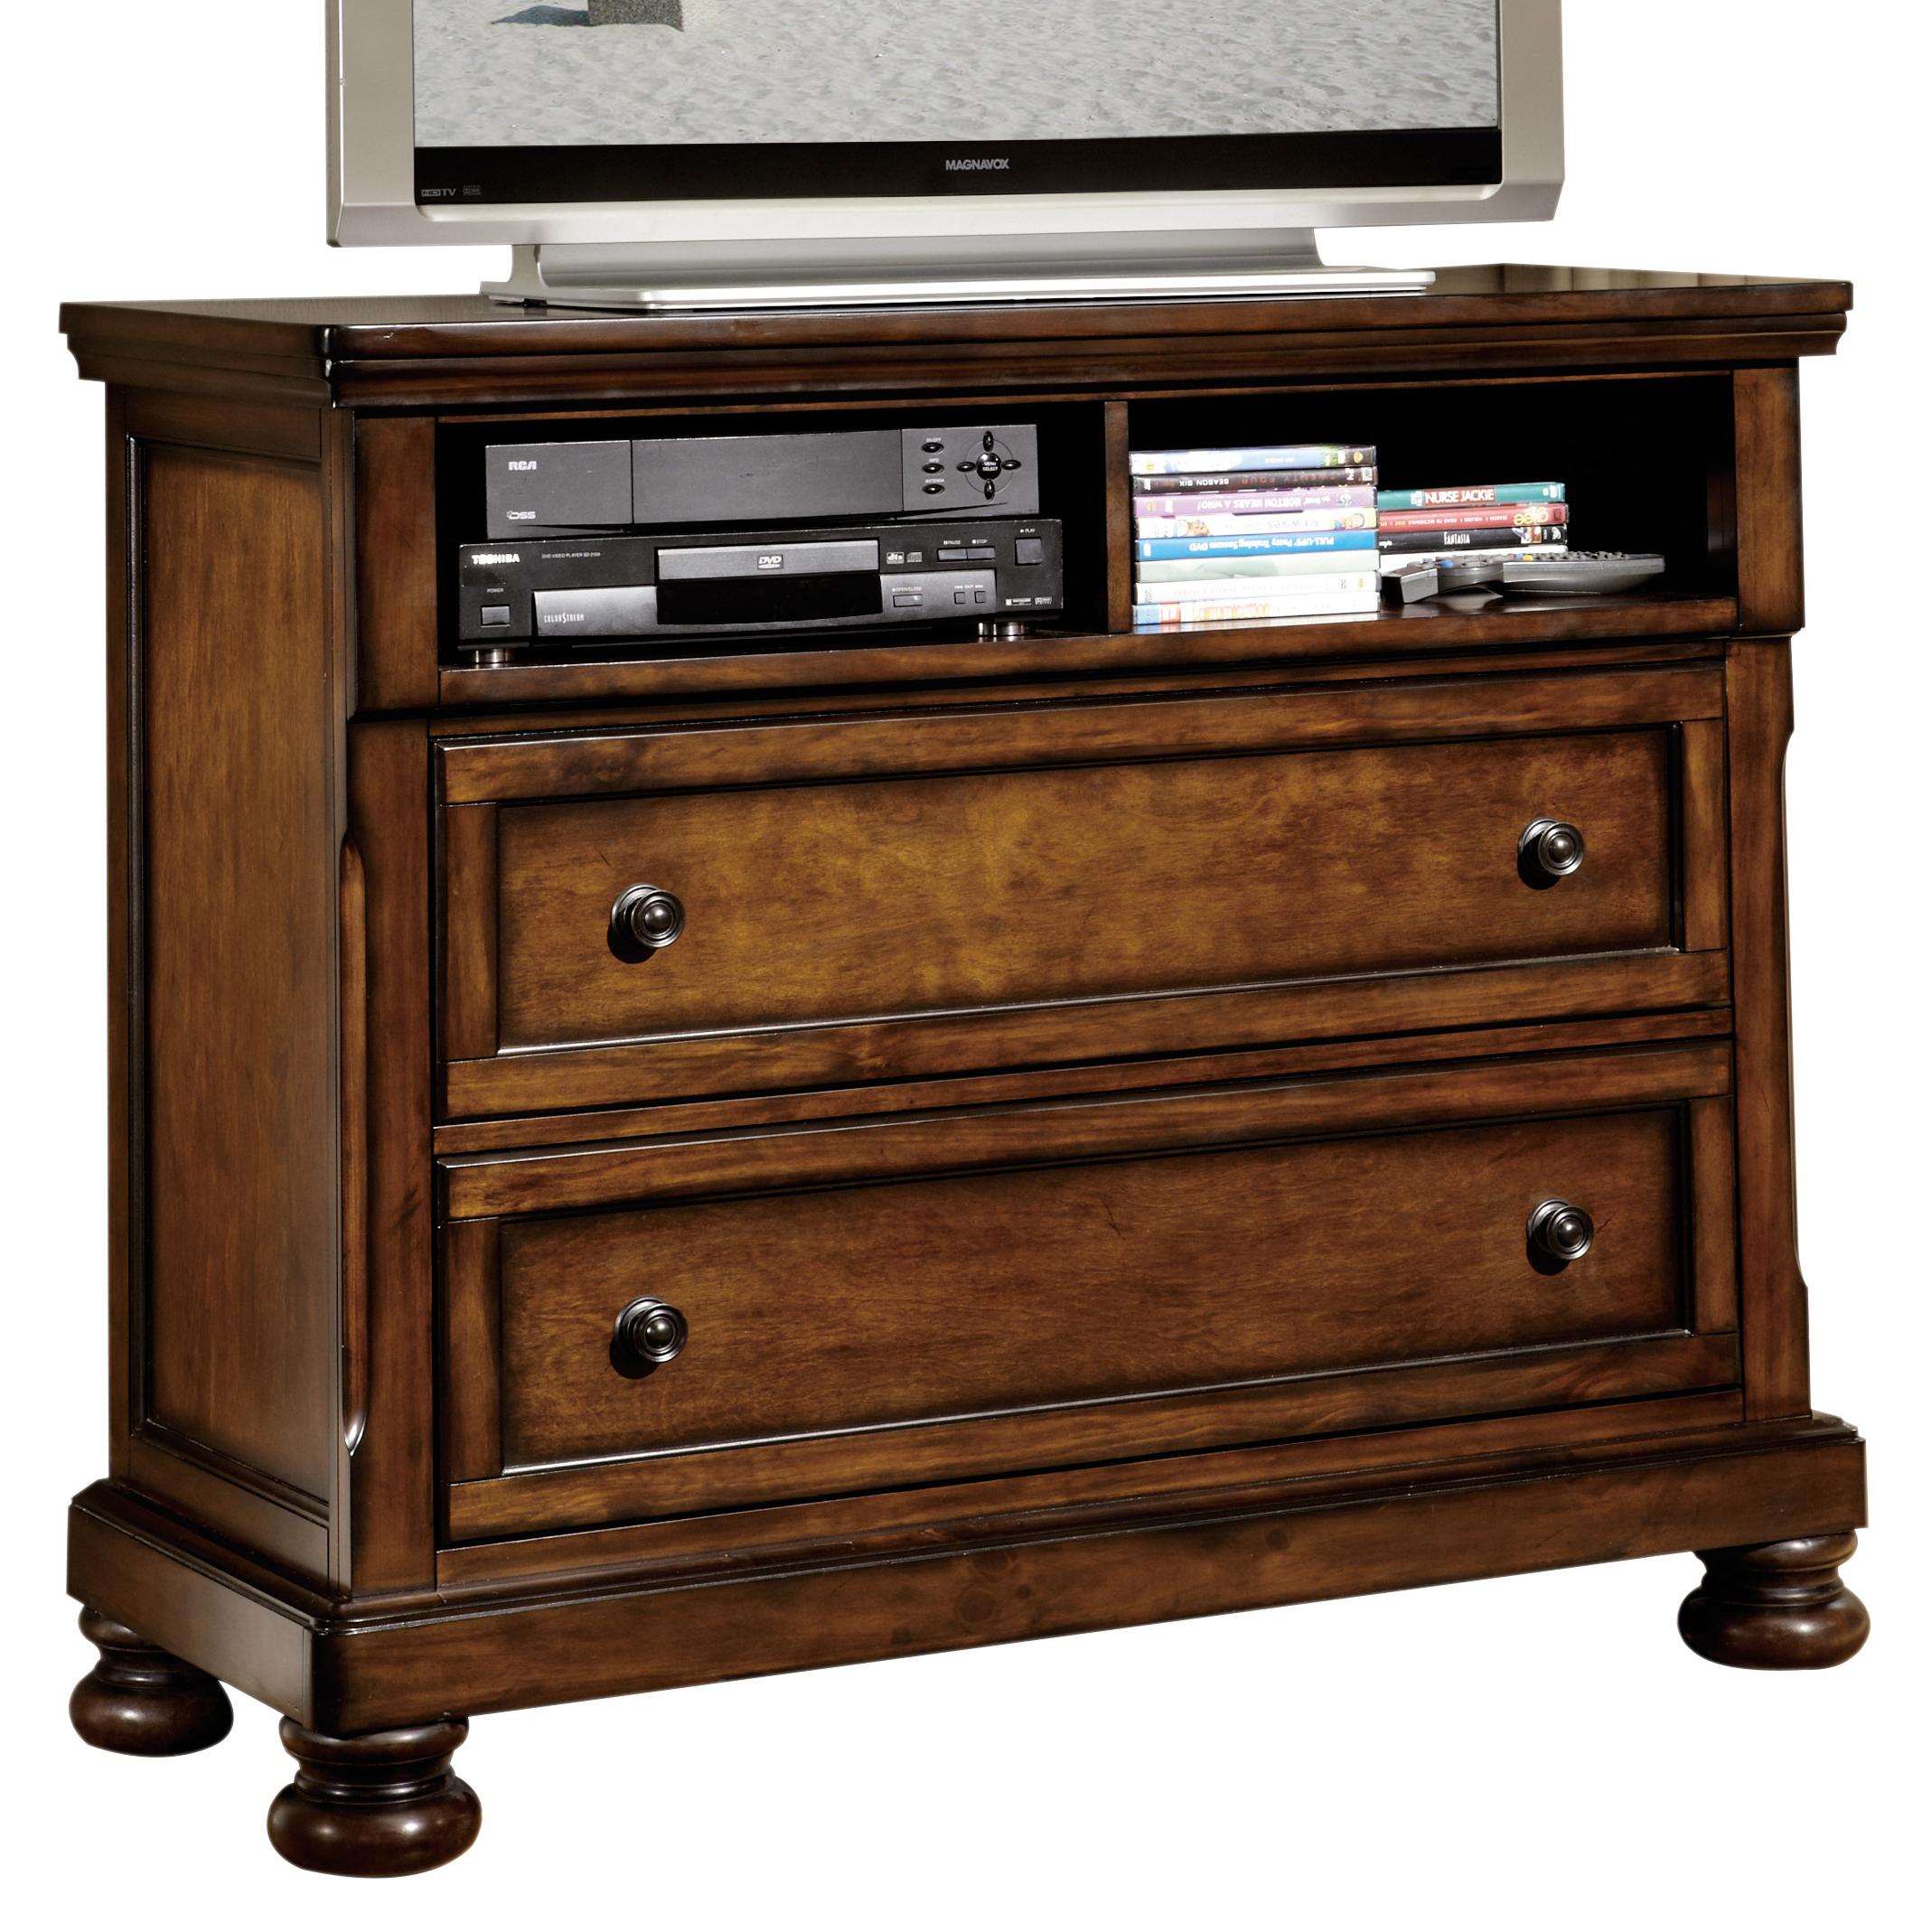 Traditional TV Chest 2159-11 Cumberland 2159-11 in Cherry 